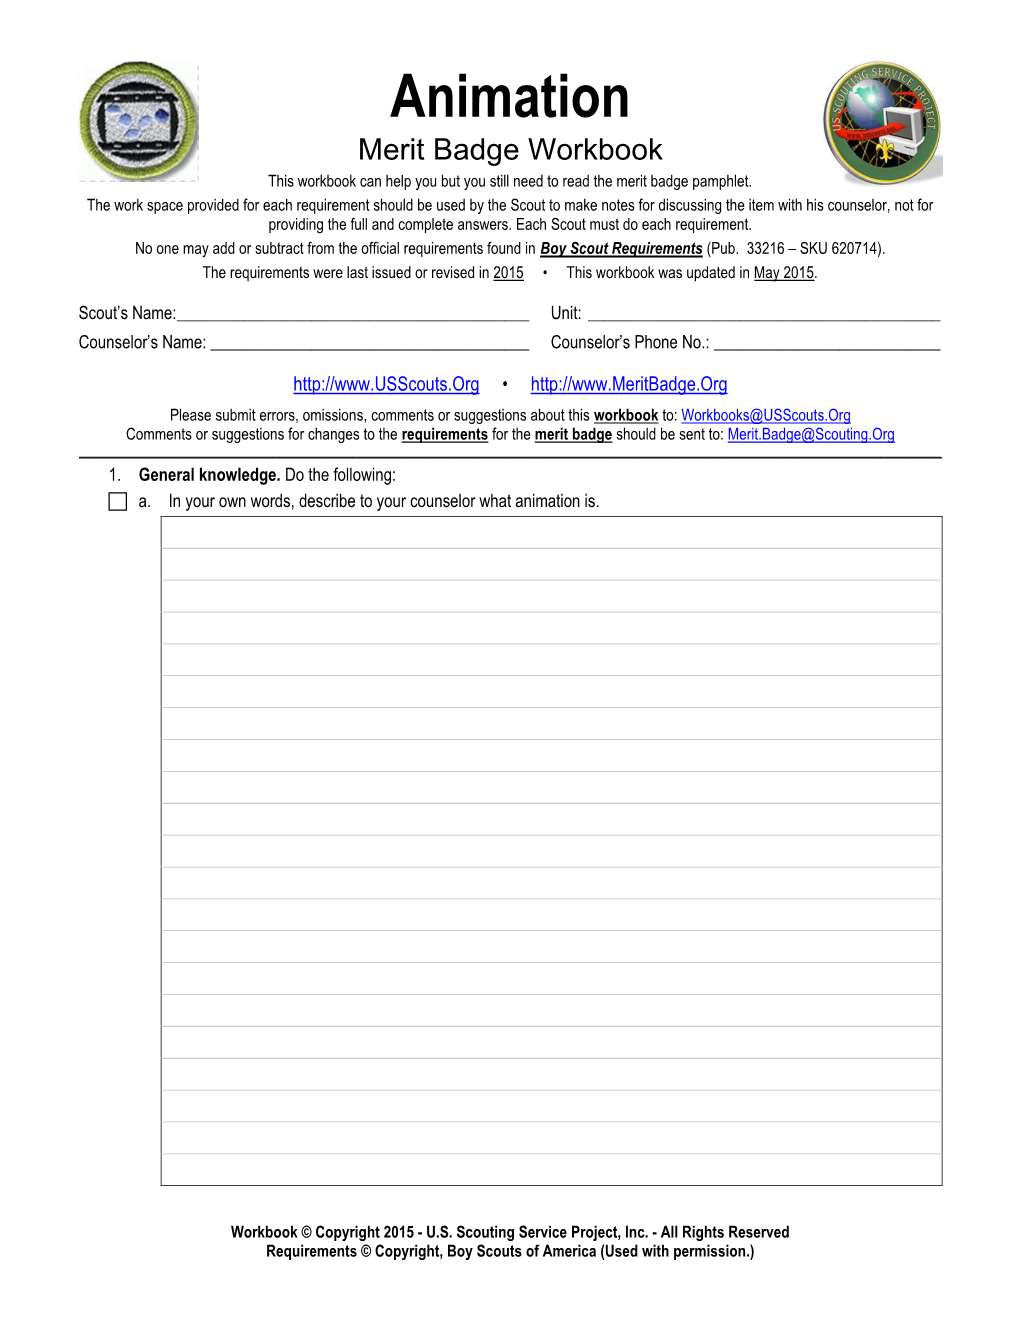 Animation Merit Badge Workbook This Workbook Can Help You but You Still Need to Read the Merit Badge Pamphlet